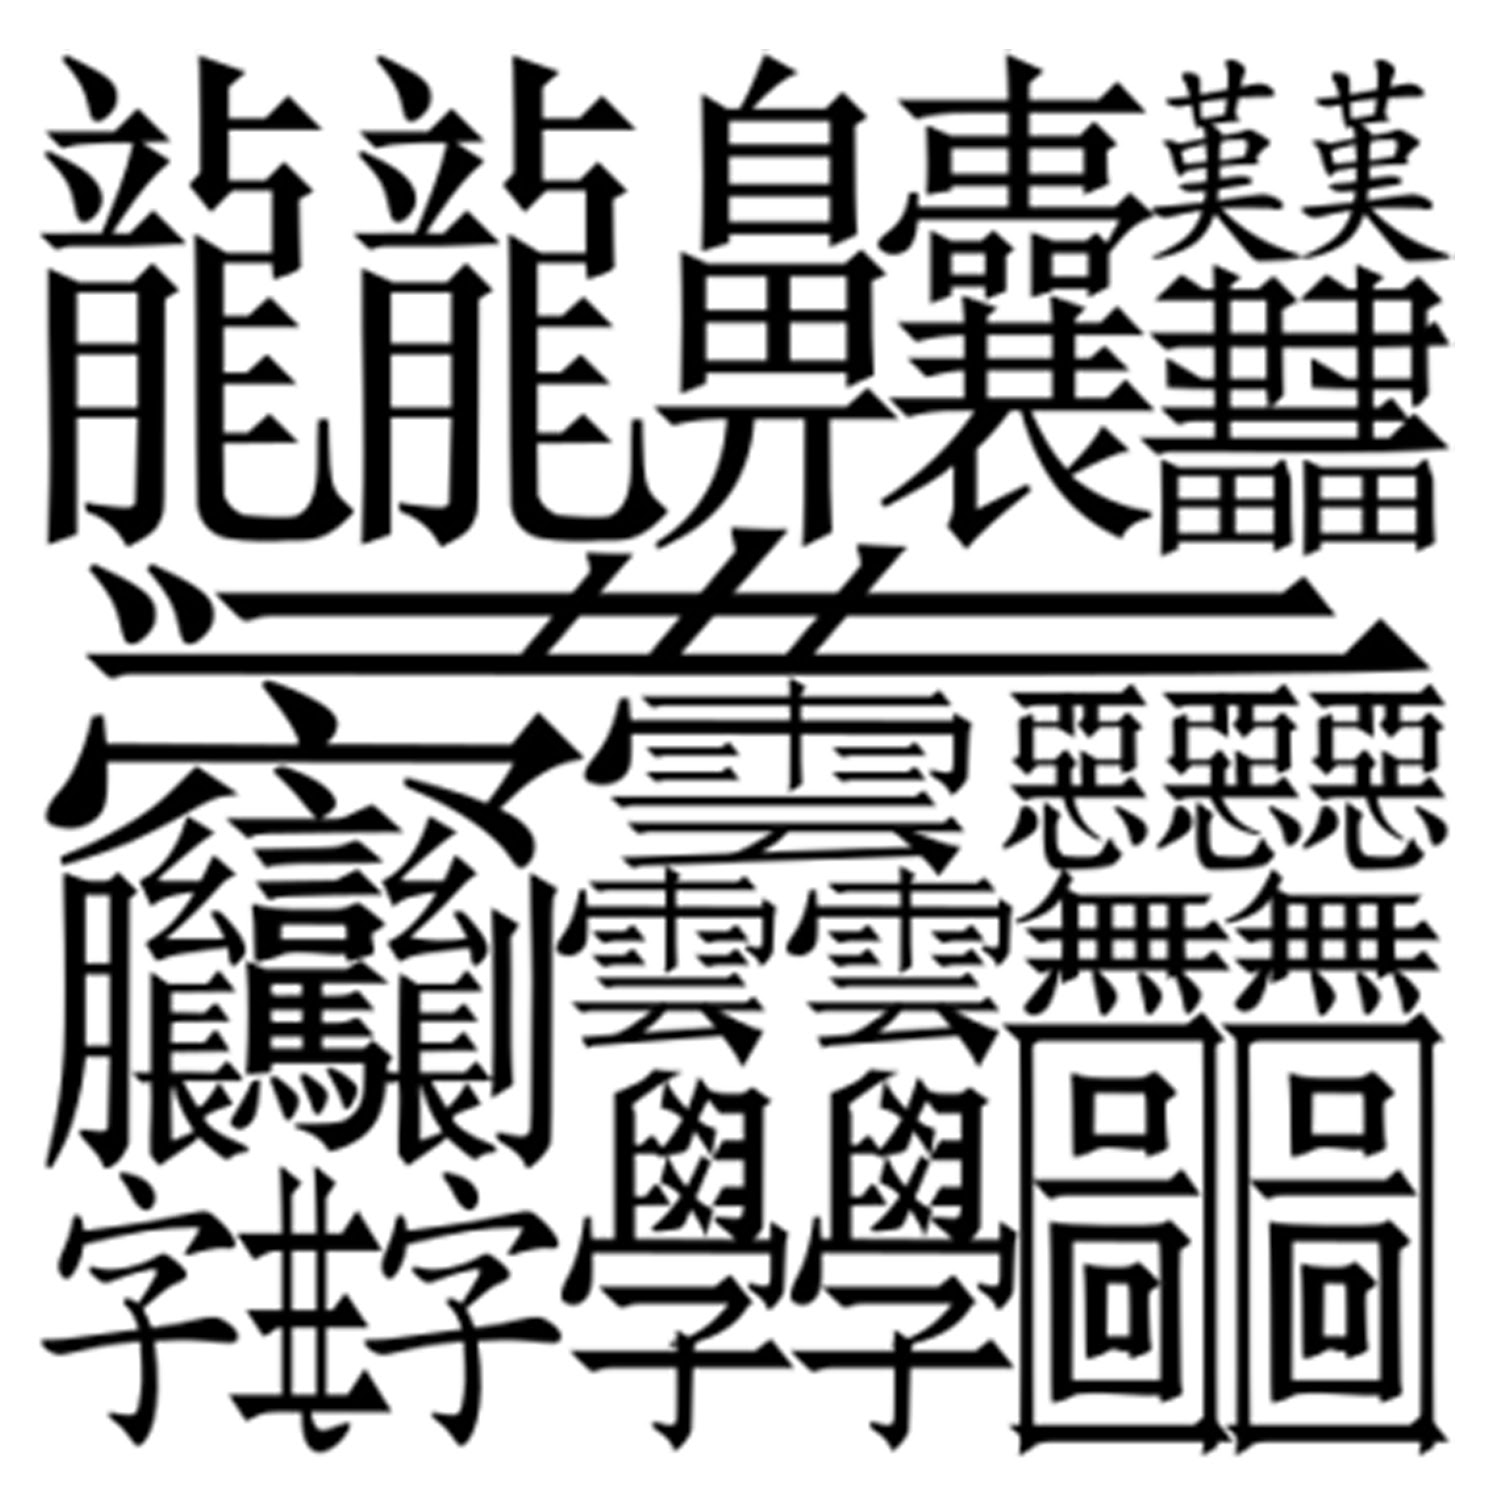 Why is Chinese script difficult?